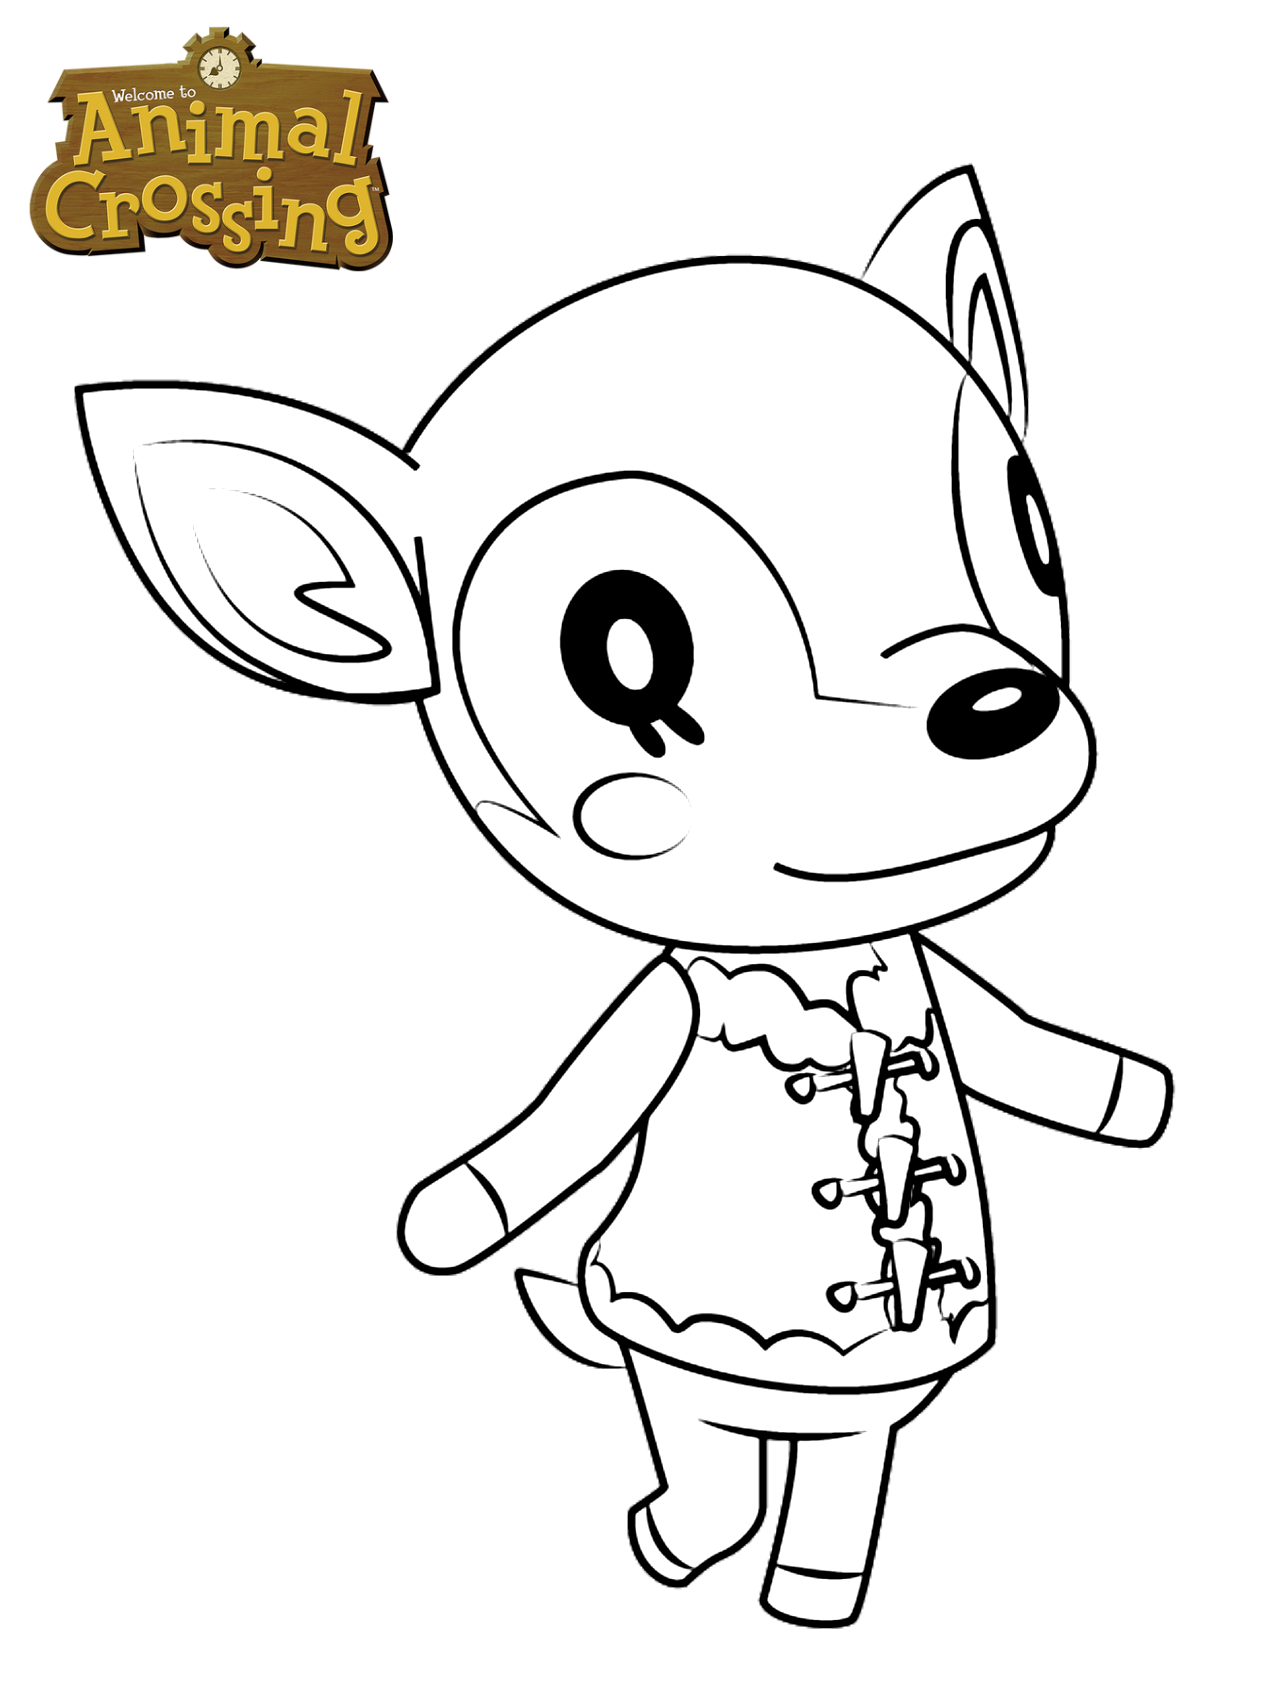 Animal Crossing Coloring Pages - Animal Crossing Coloring Pages Free